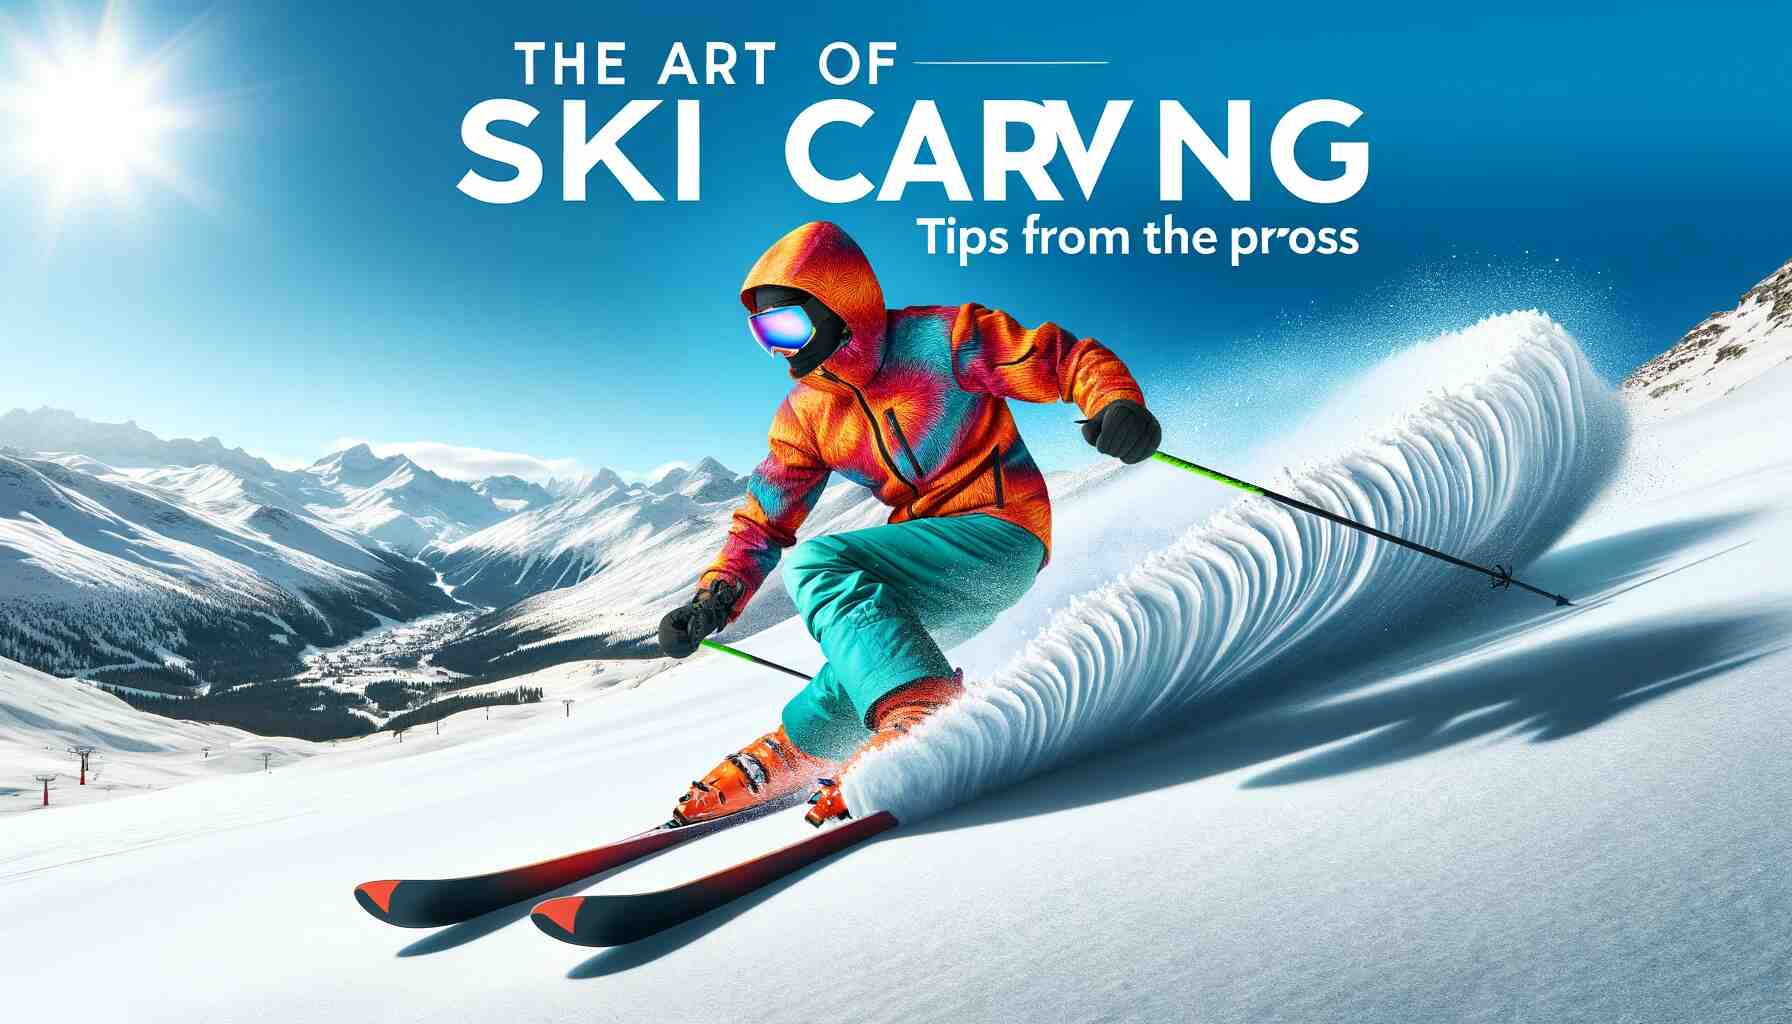 Here's the featured image for "The Art of Ski Carving: Tips from the Pros." It showcases a skilled skier carving down a snowy slope with the title text displayed at the top.